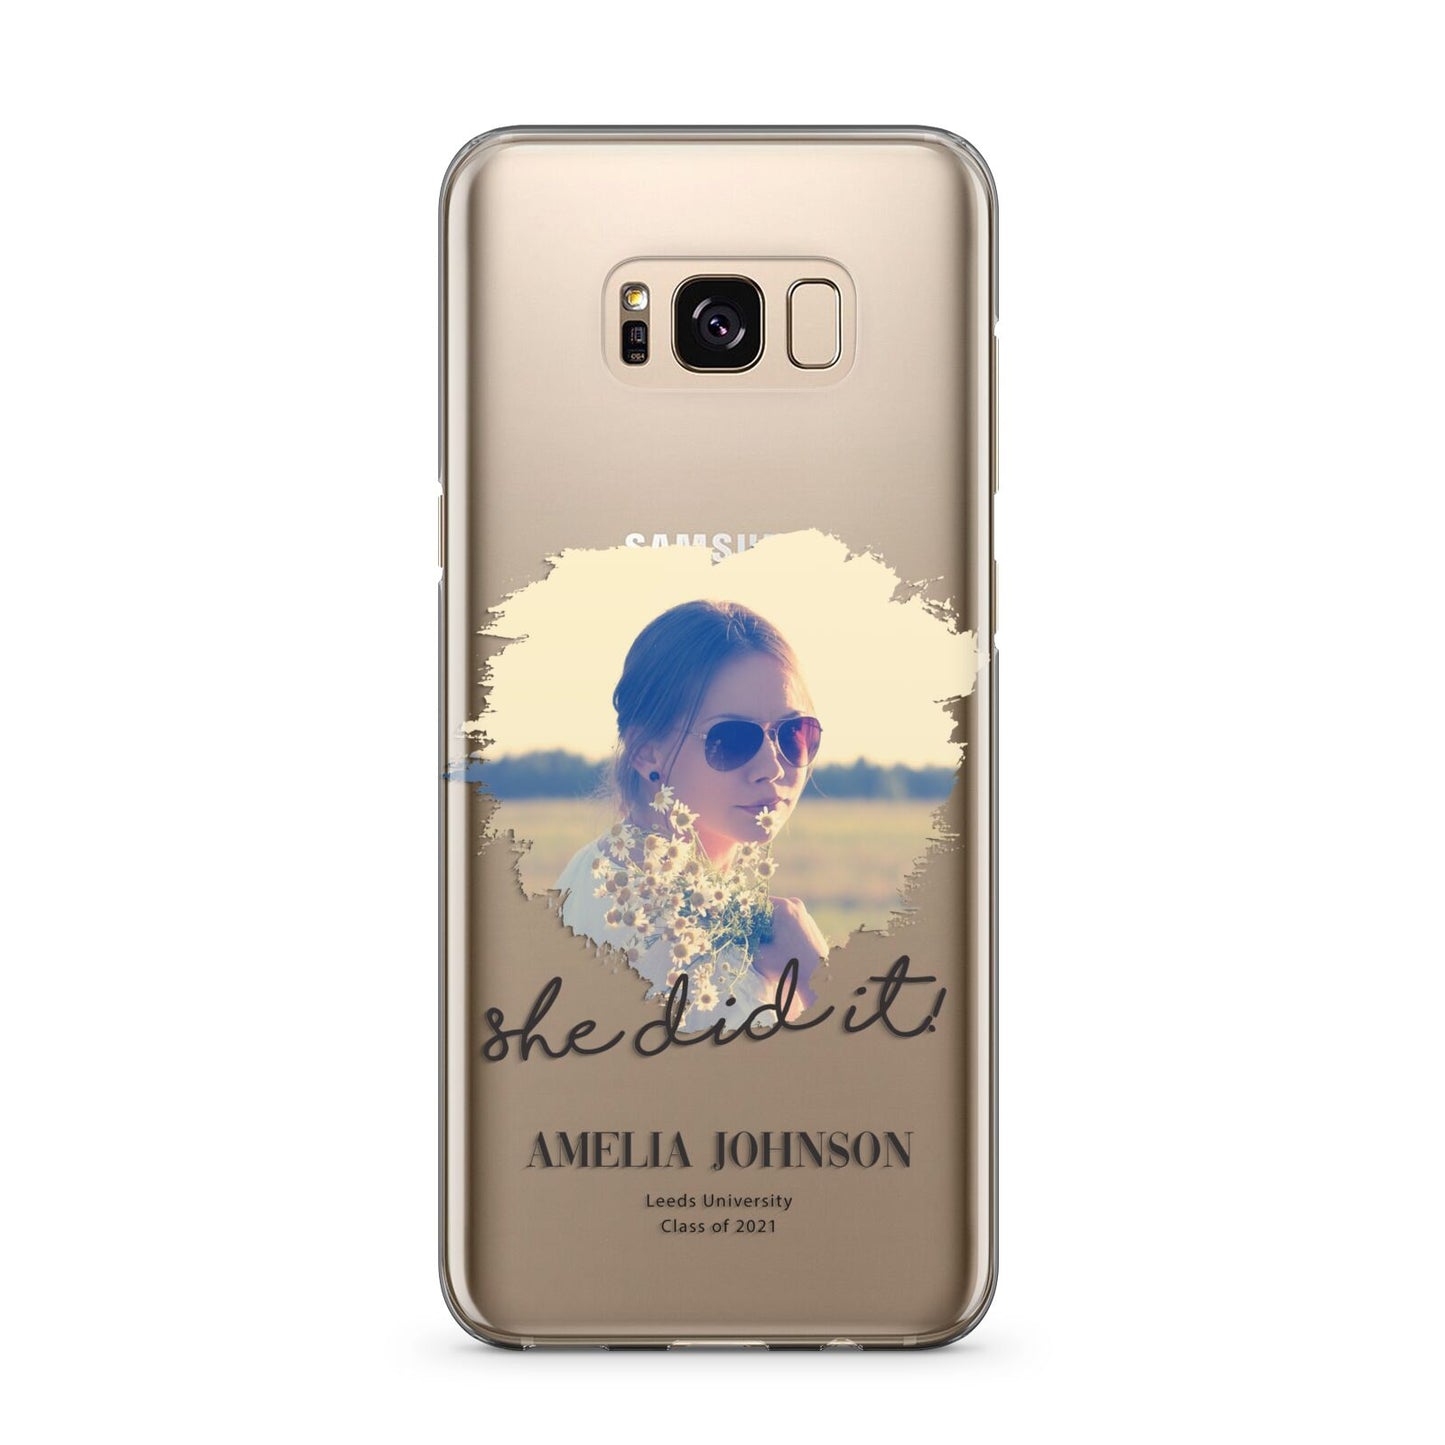 She Did It Graduation Photo with Name Samsung Galaxy S8 Plus Case